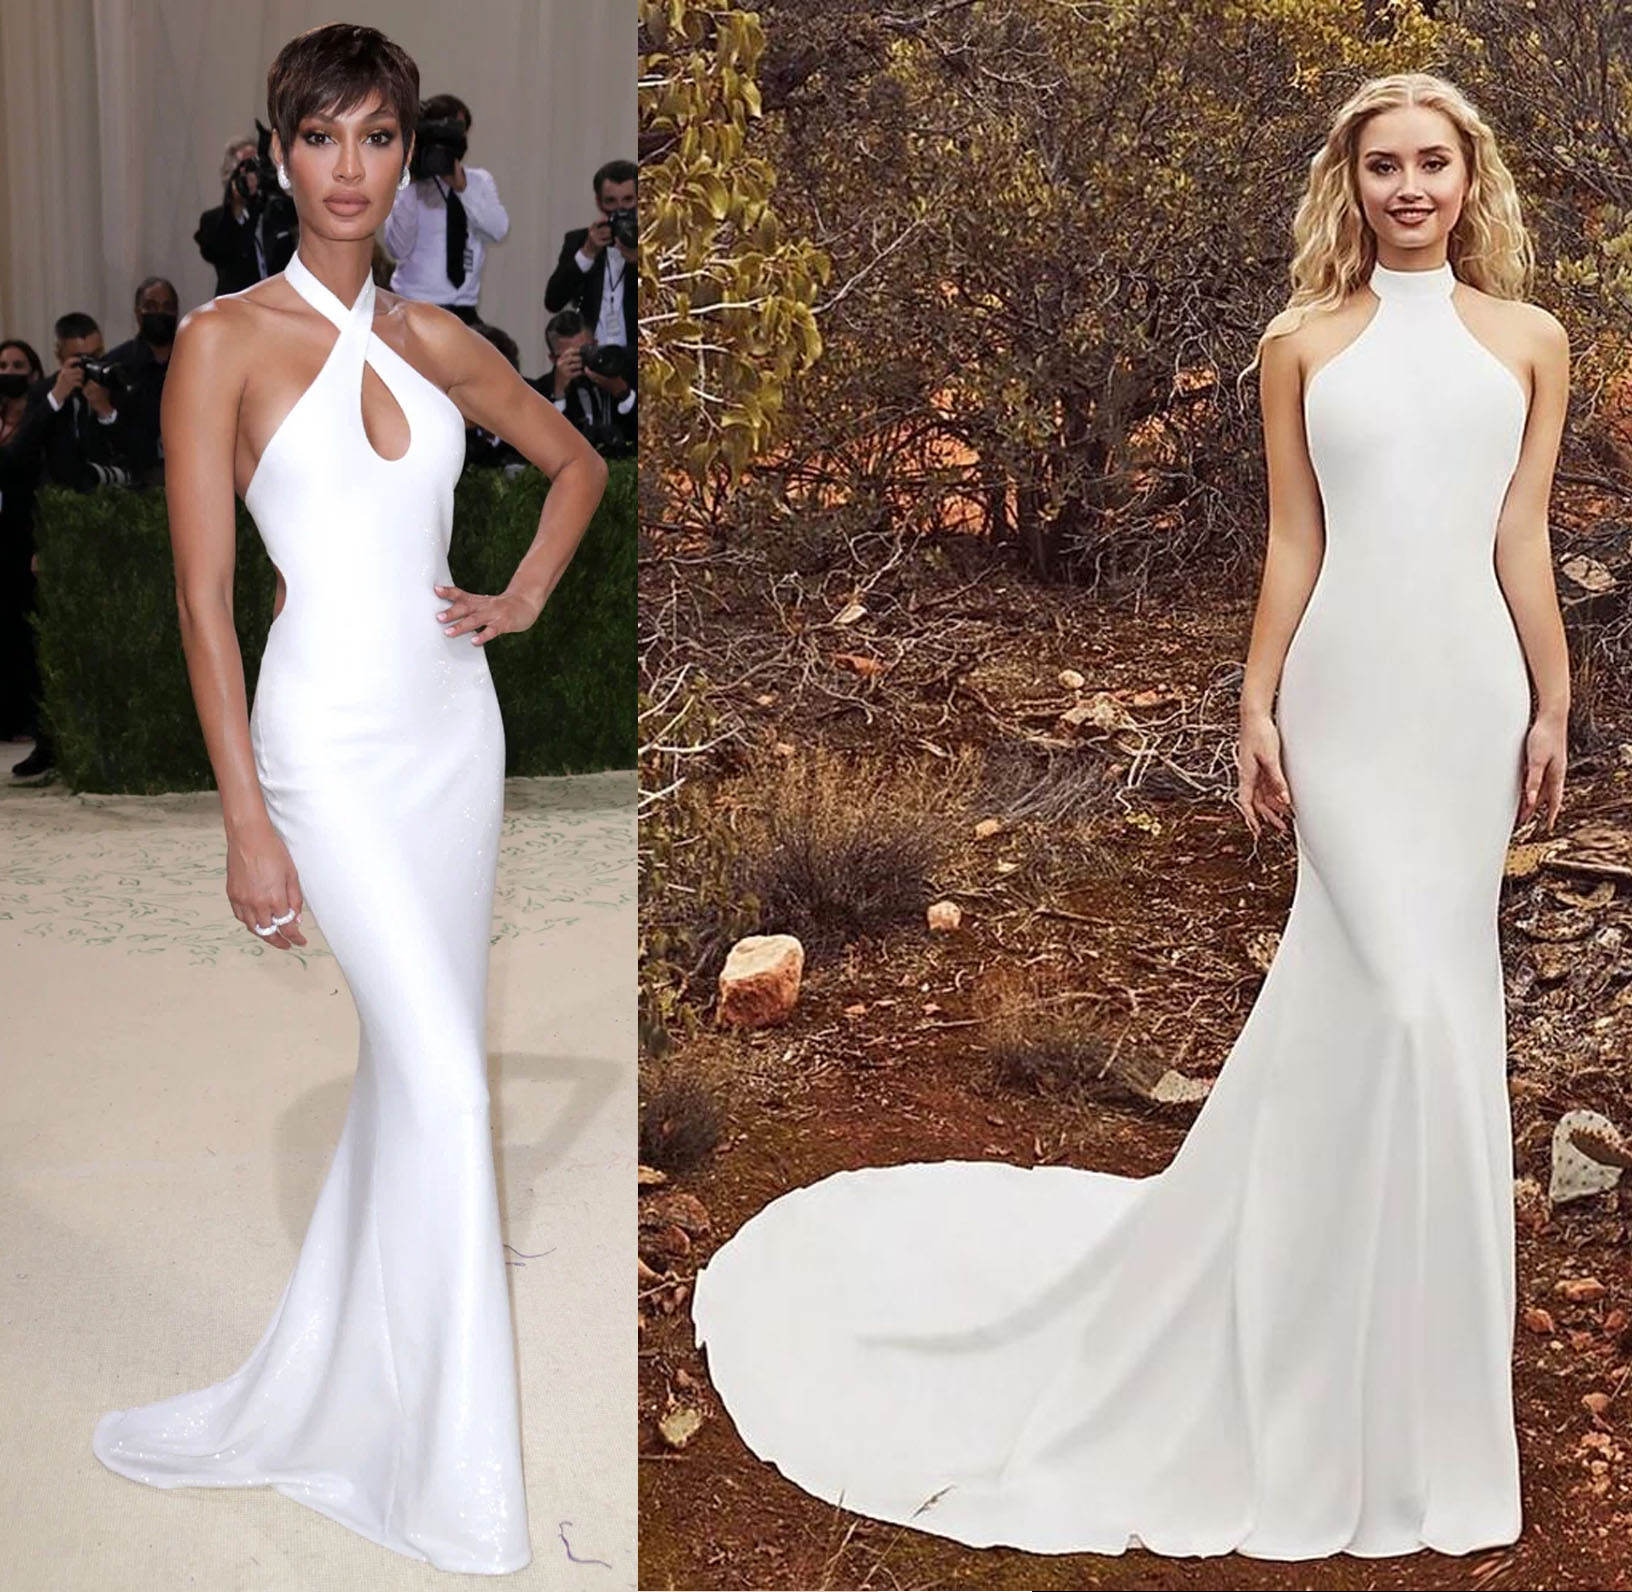 Joan Smalls in Ralph Lauren vs Paisley LP2008 Wedding Dress by Calla Blanche Bridal at Fashionably Yours